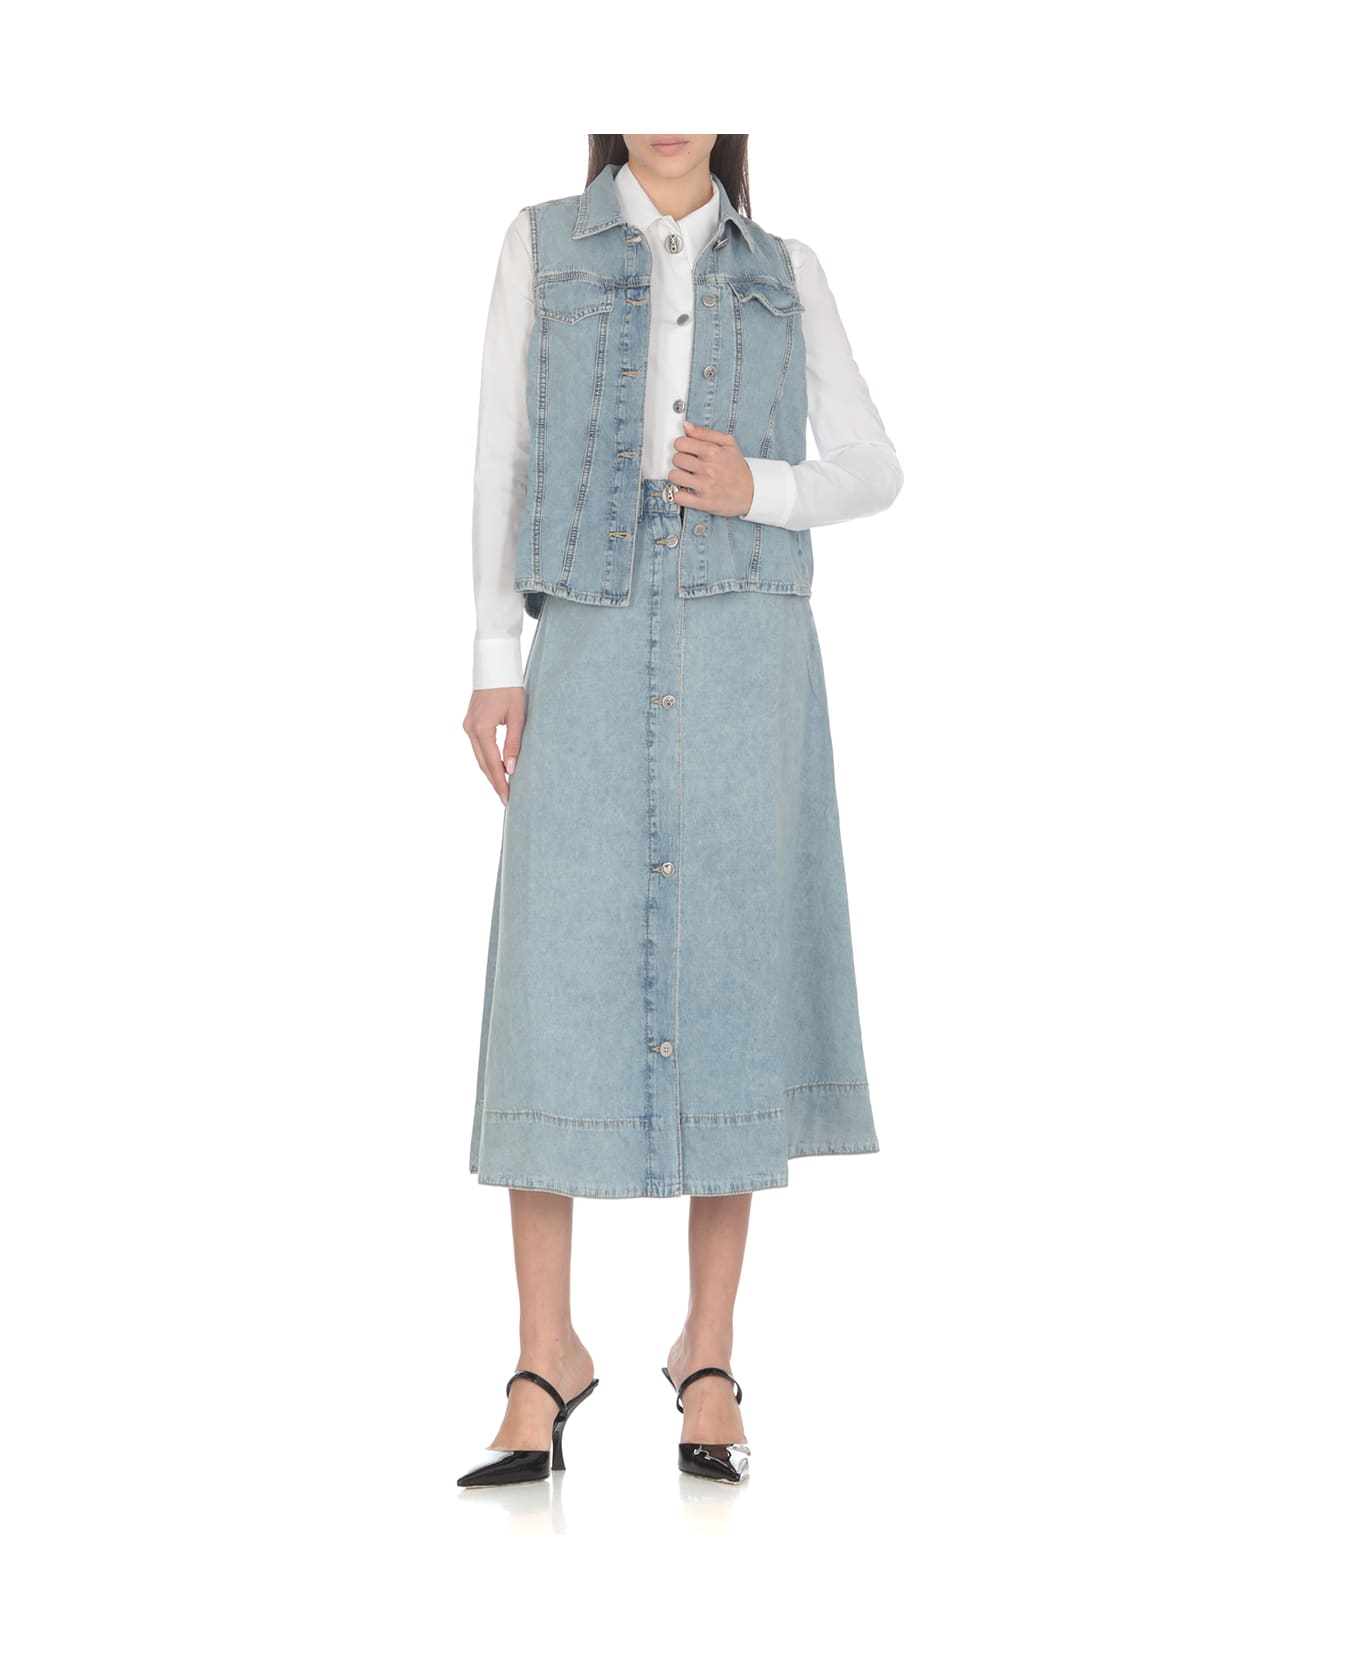 M05CH1N0 Jeans Cotton Skirt - Stone Washed スカート